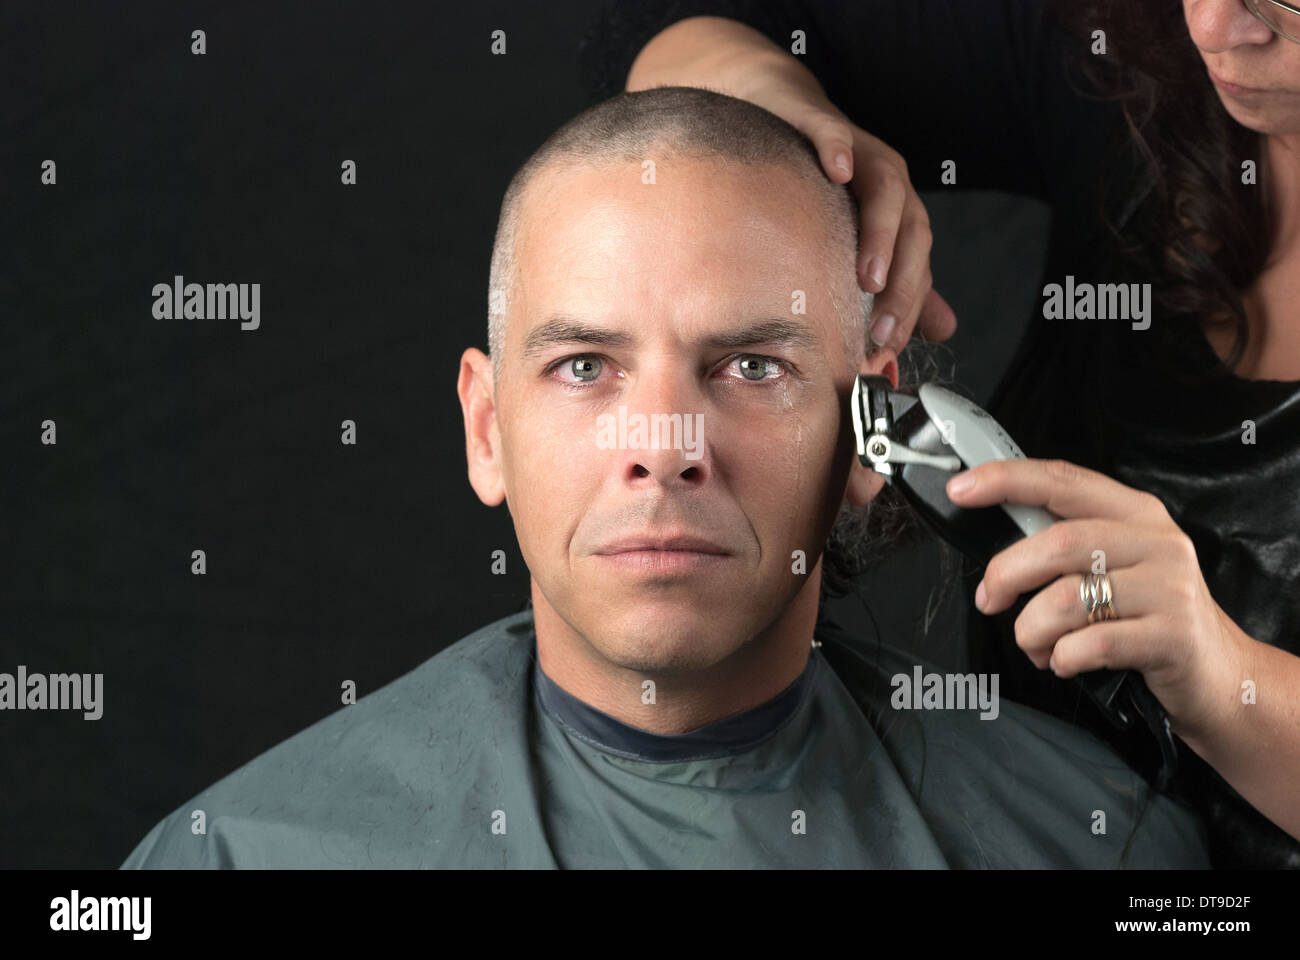 Mourning Man Gets Head Shaved For Fundraiser, Looks To Camera Stock Photo